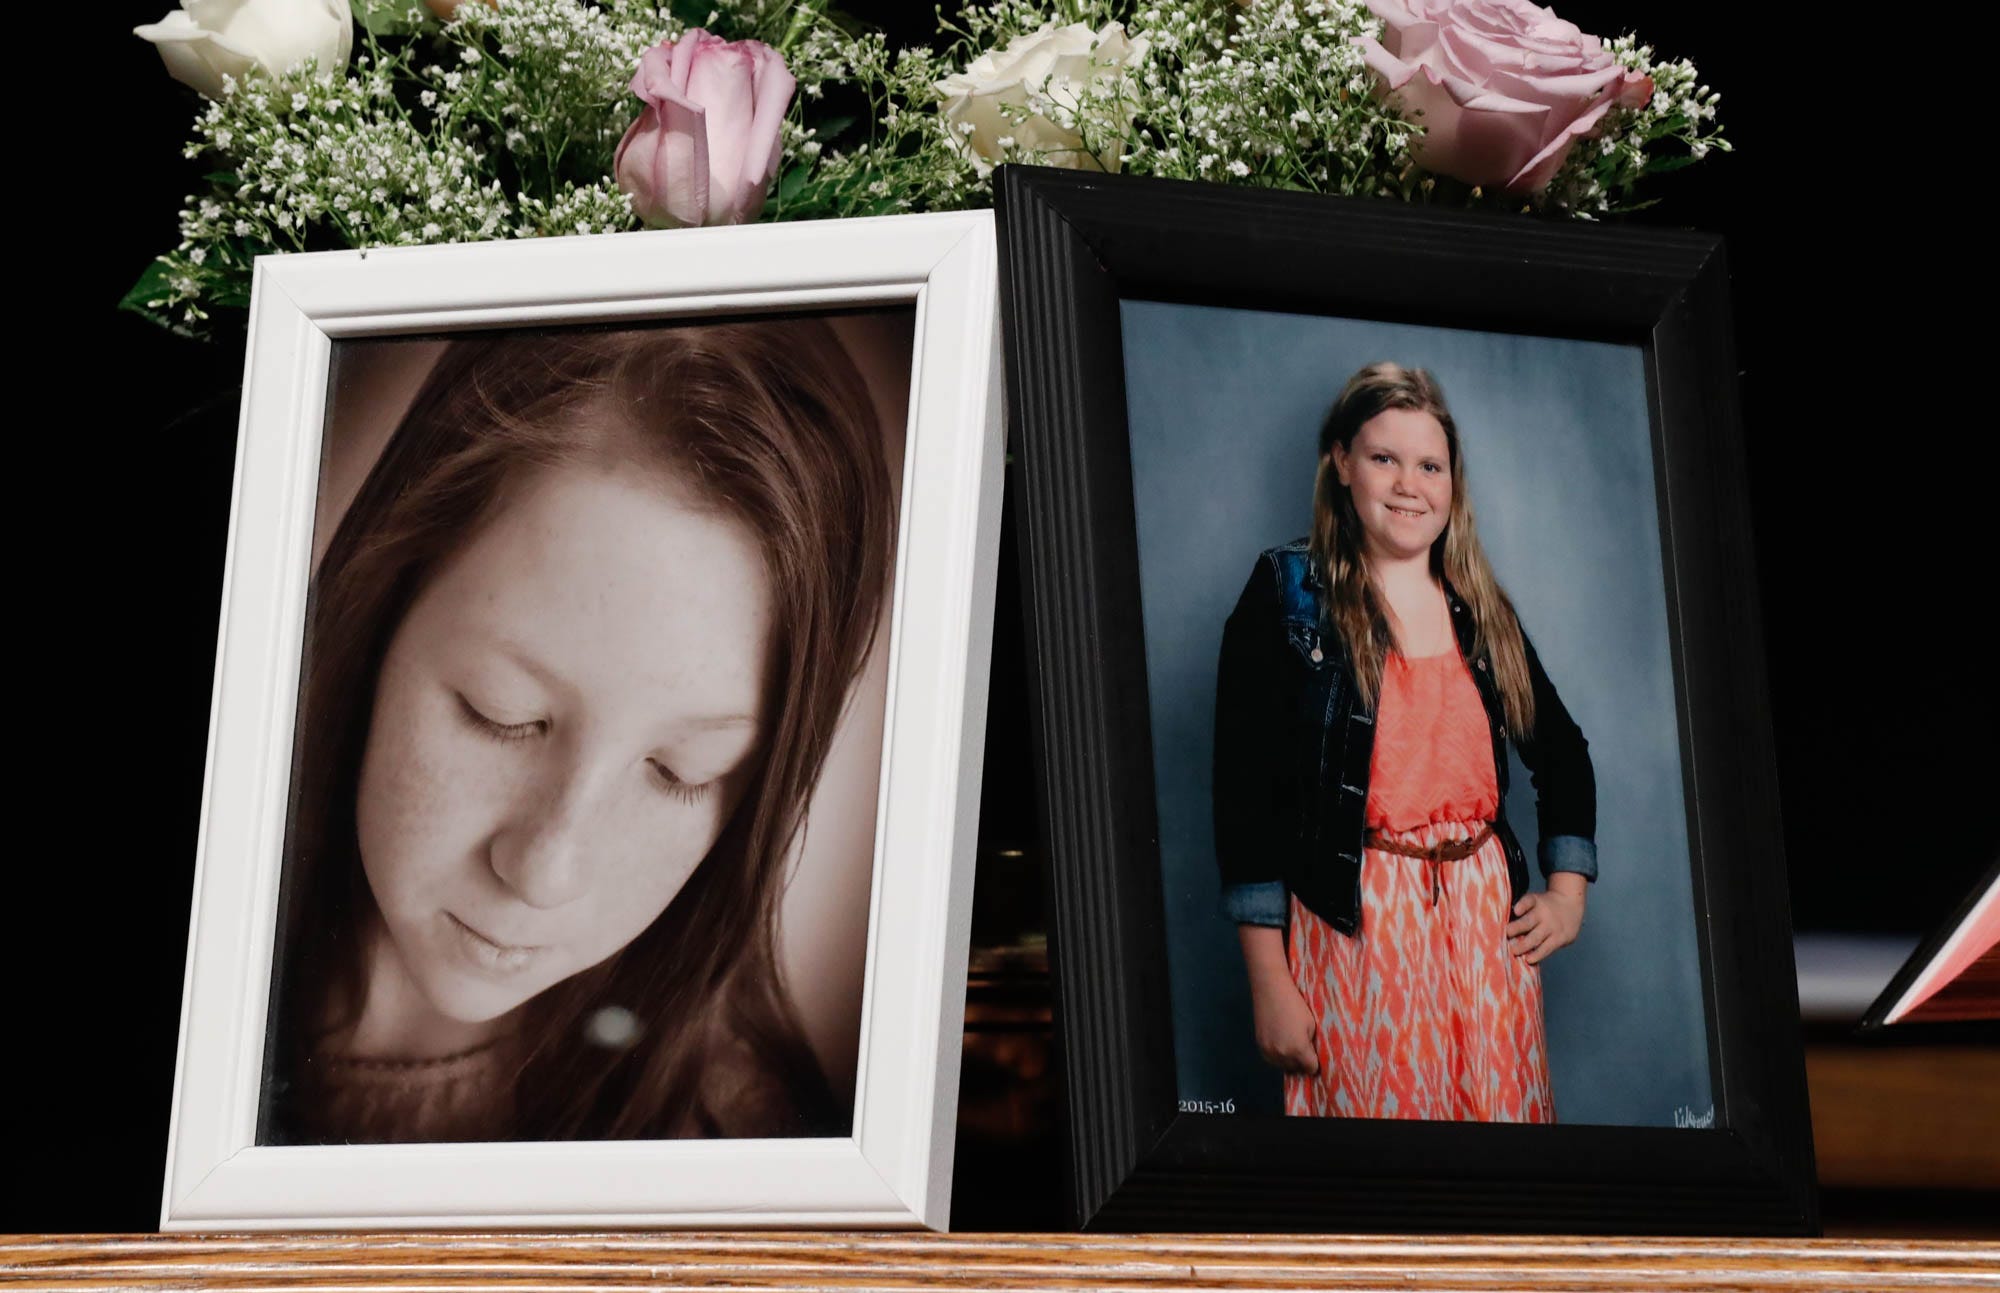 German Amateur Teen - Delphi murders: Everything we've reported on the deaths of Abby & Libby